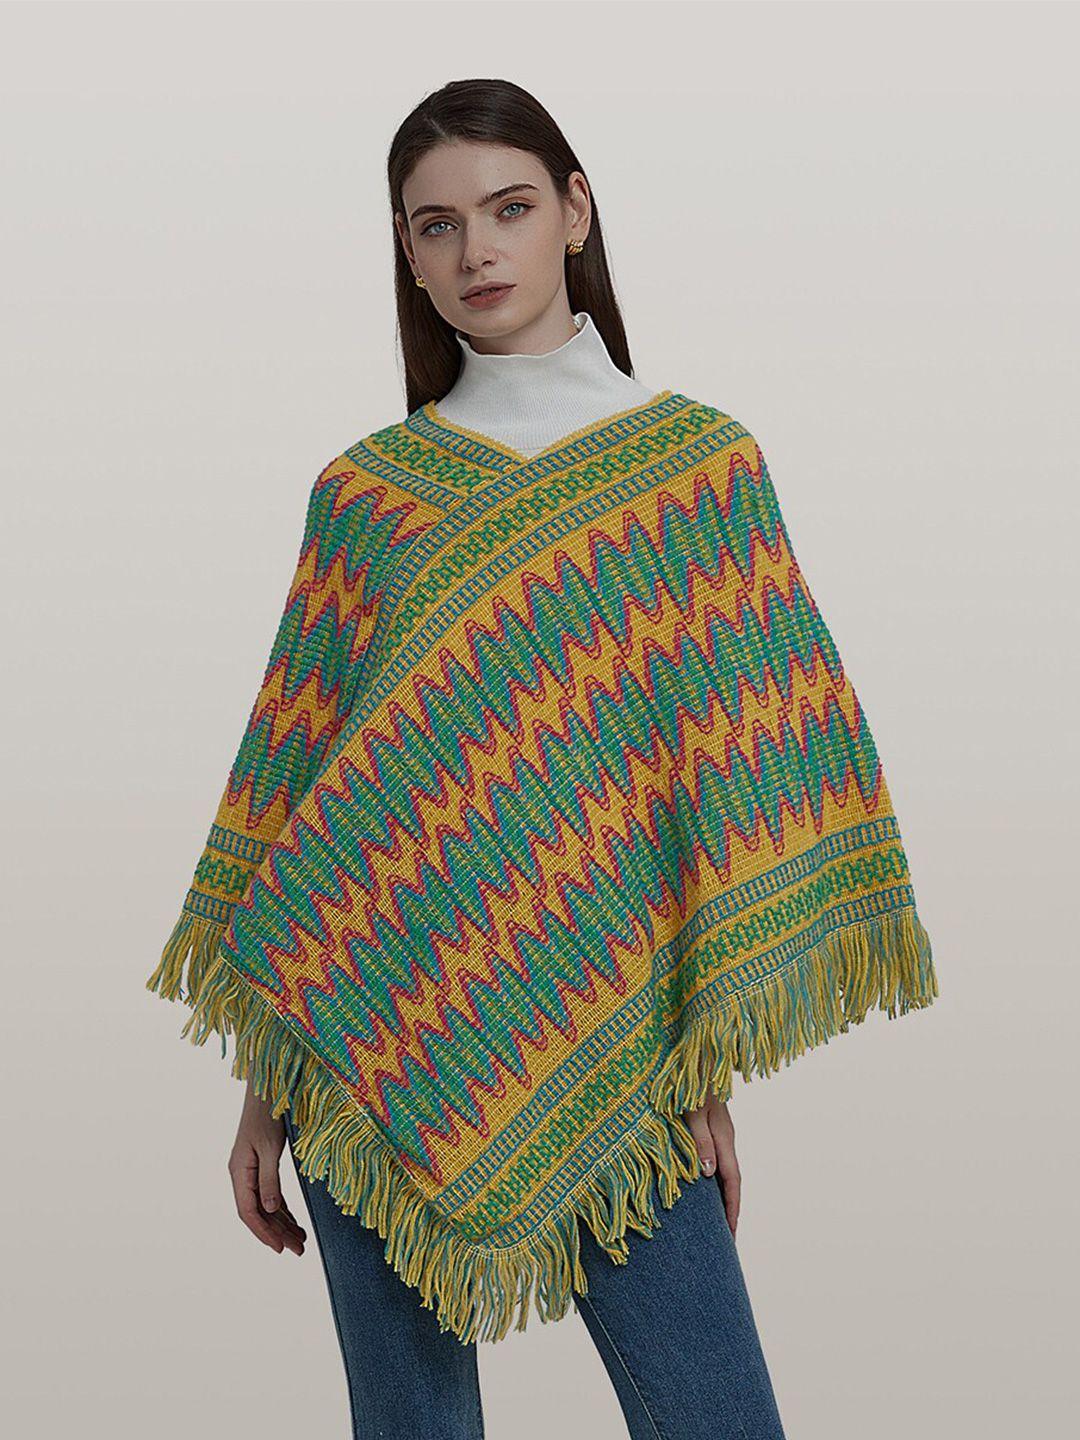 jc collection abstract embroidered poncho sweater